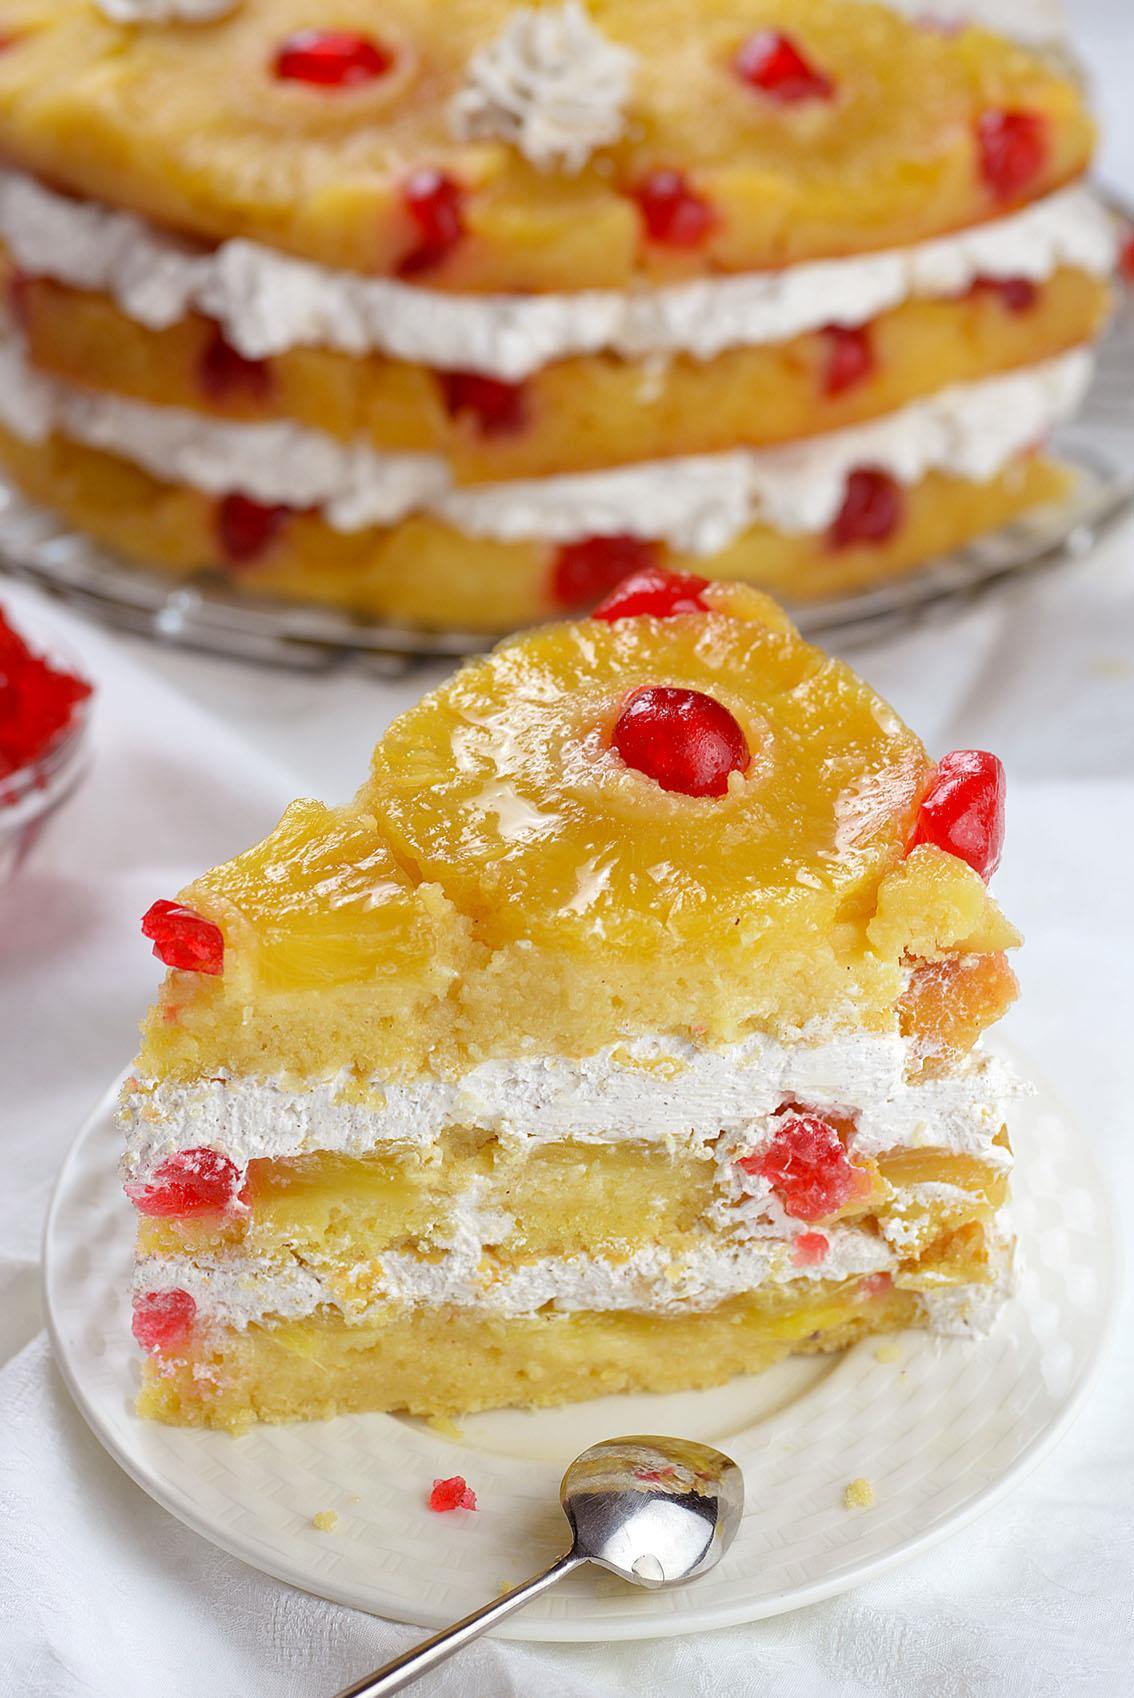 Pineapple Upside Down Cake - Triple the glaze and triple the pineapple and you’ve got a whole new world of awesome!!! This is the kind of show-stopping cake you want to bake for guests, friends and family.